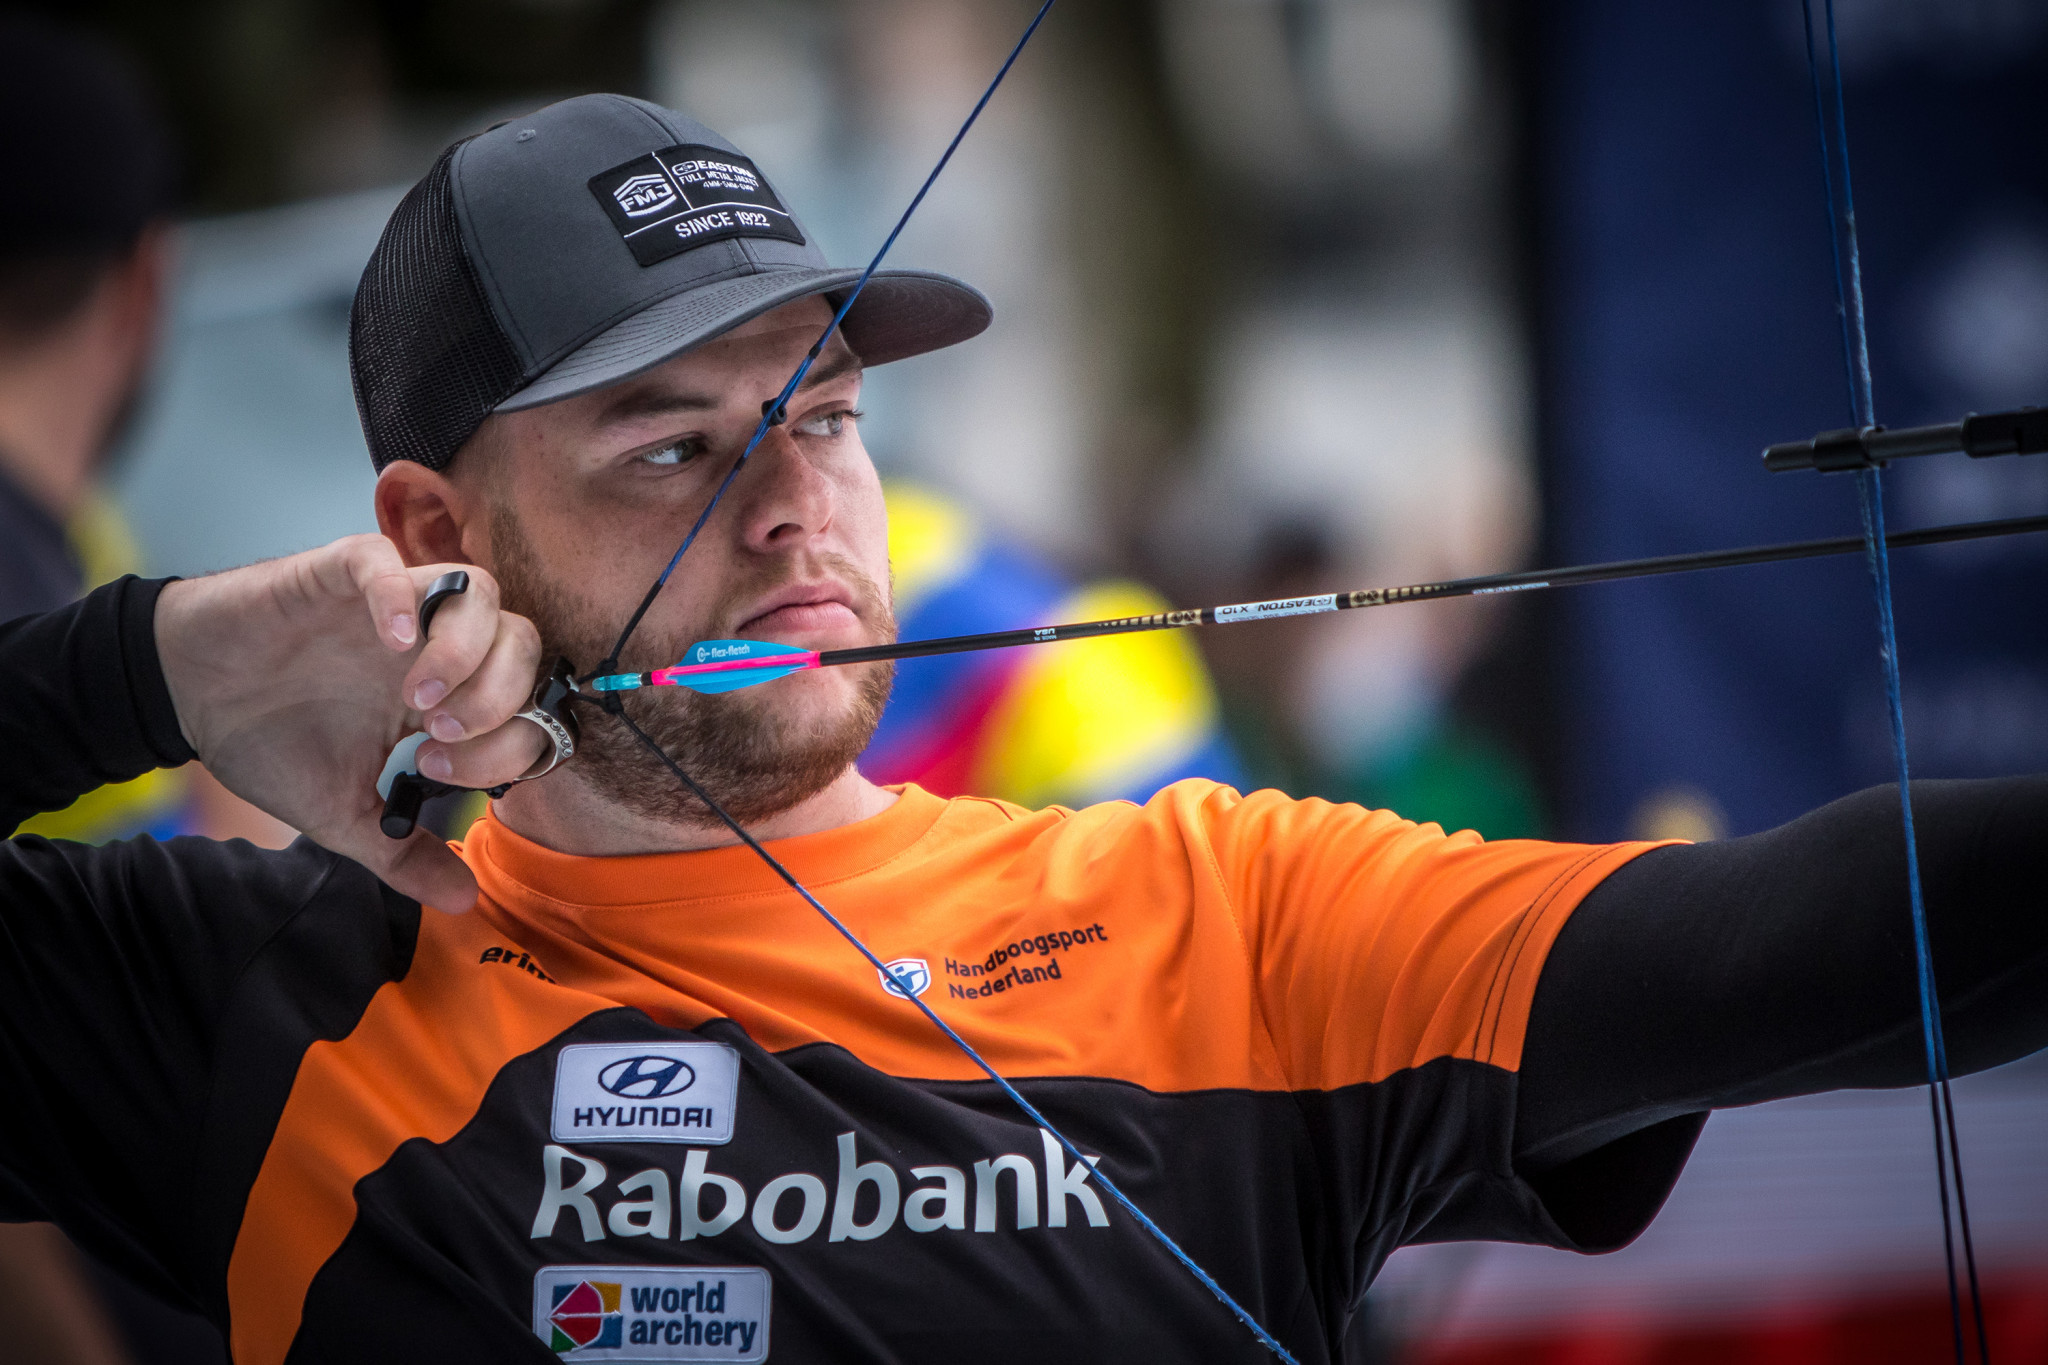 The Netherlands' Mike Schloesser qualified for the Archery World Cup Final with victory in the men's compound event in Antalya ©Getty Images